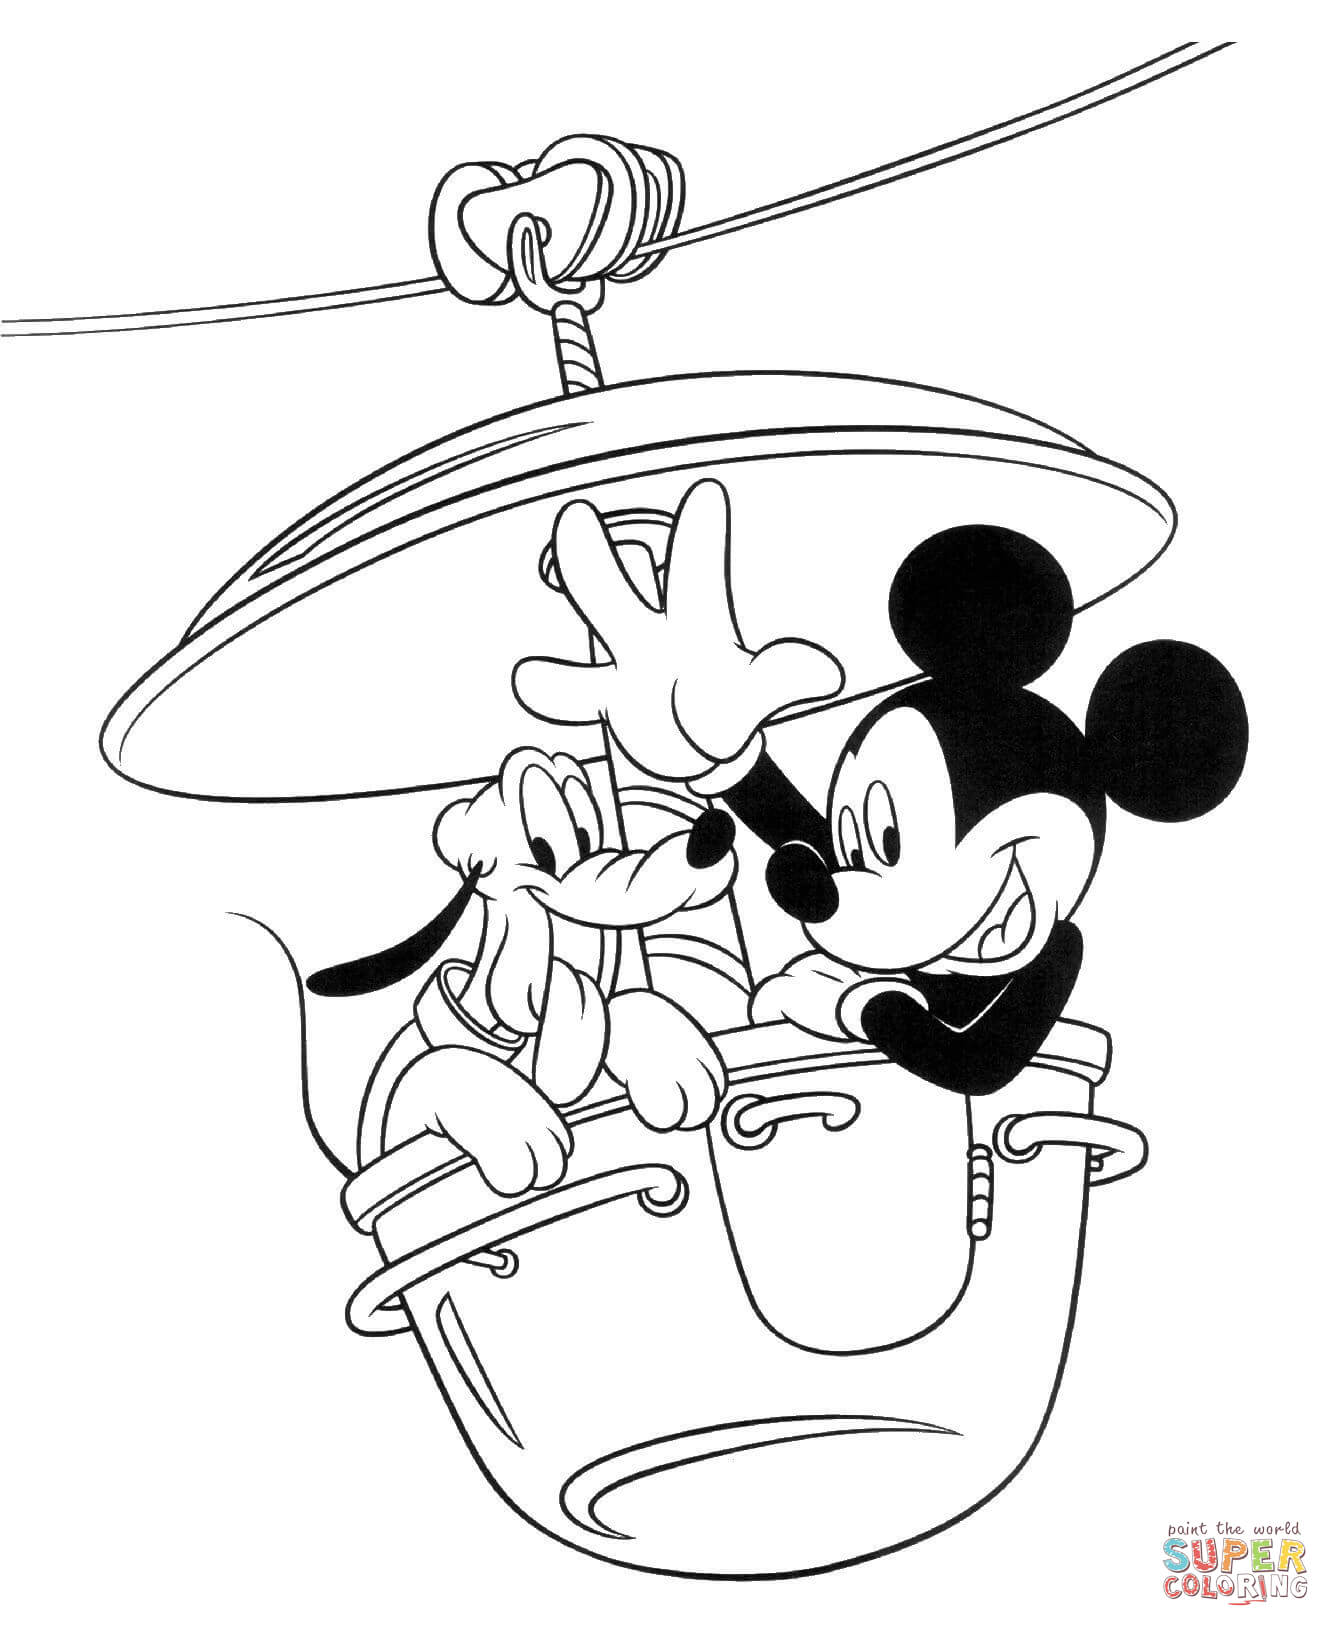 Mickey with pluto coloring page free printable coloring pages